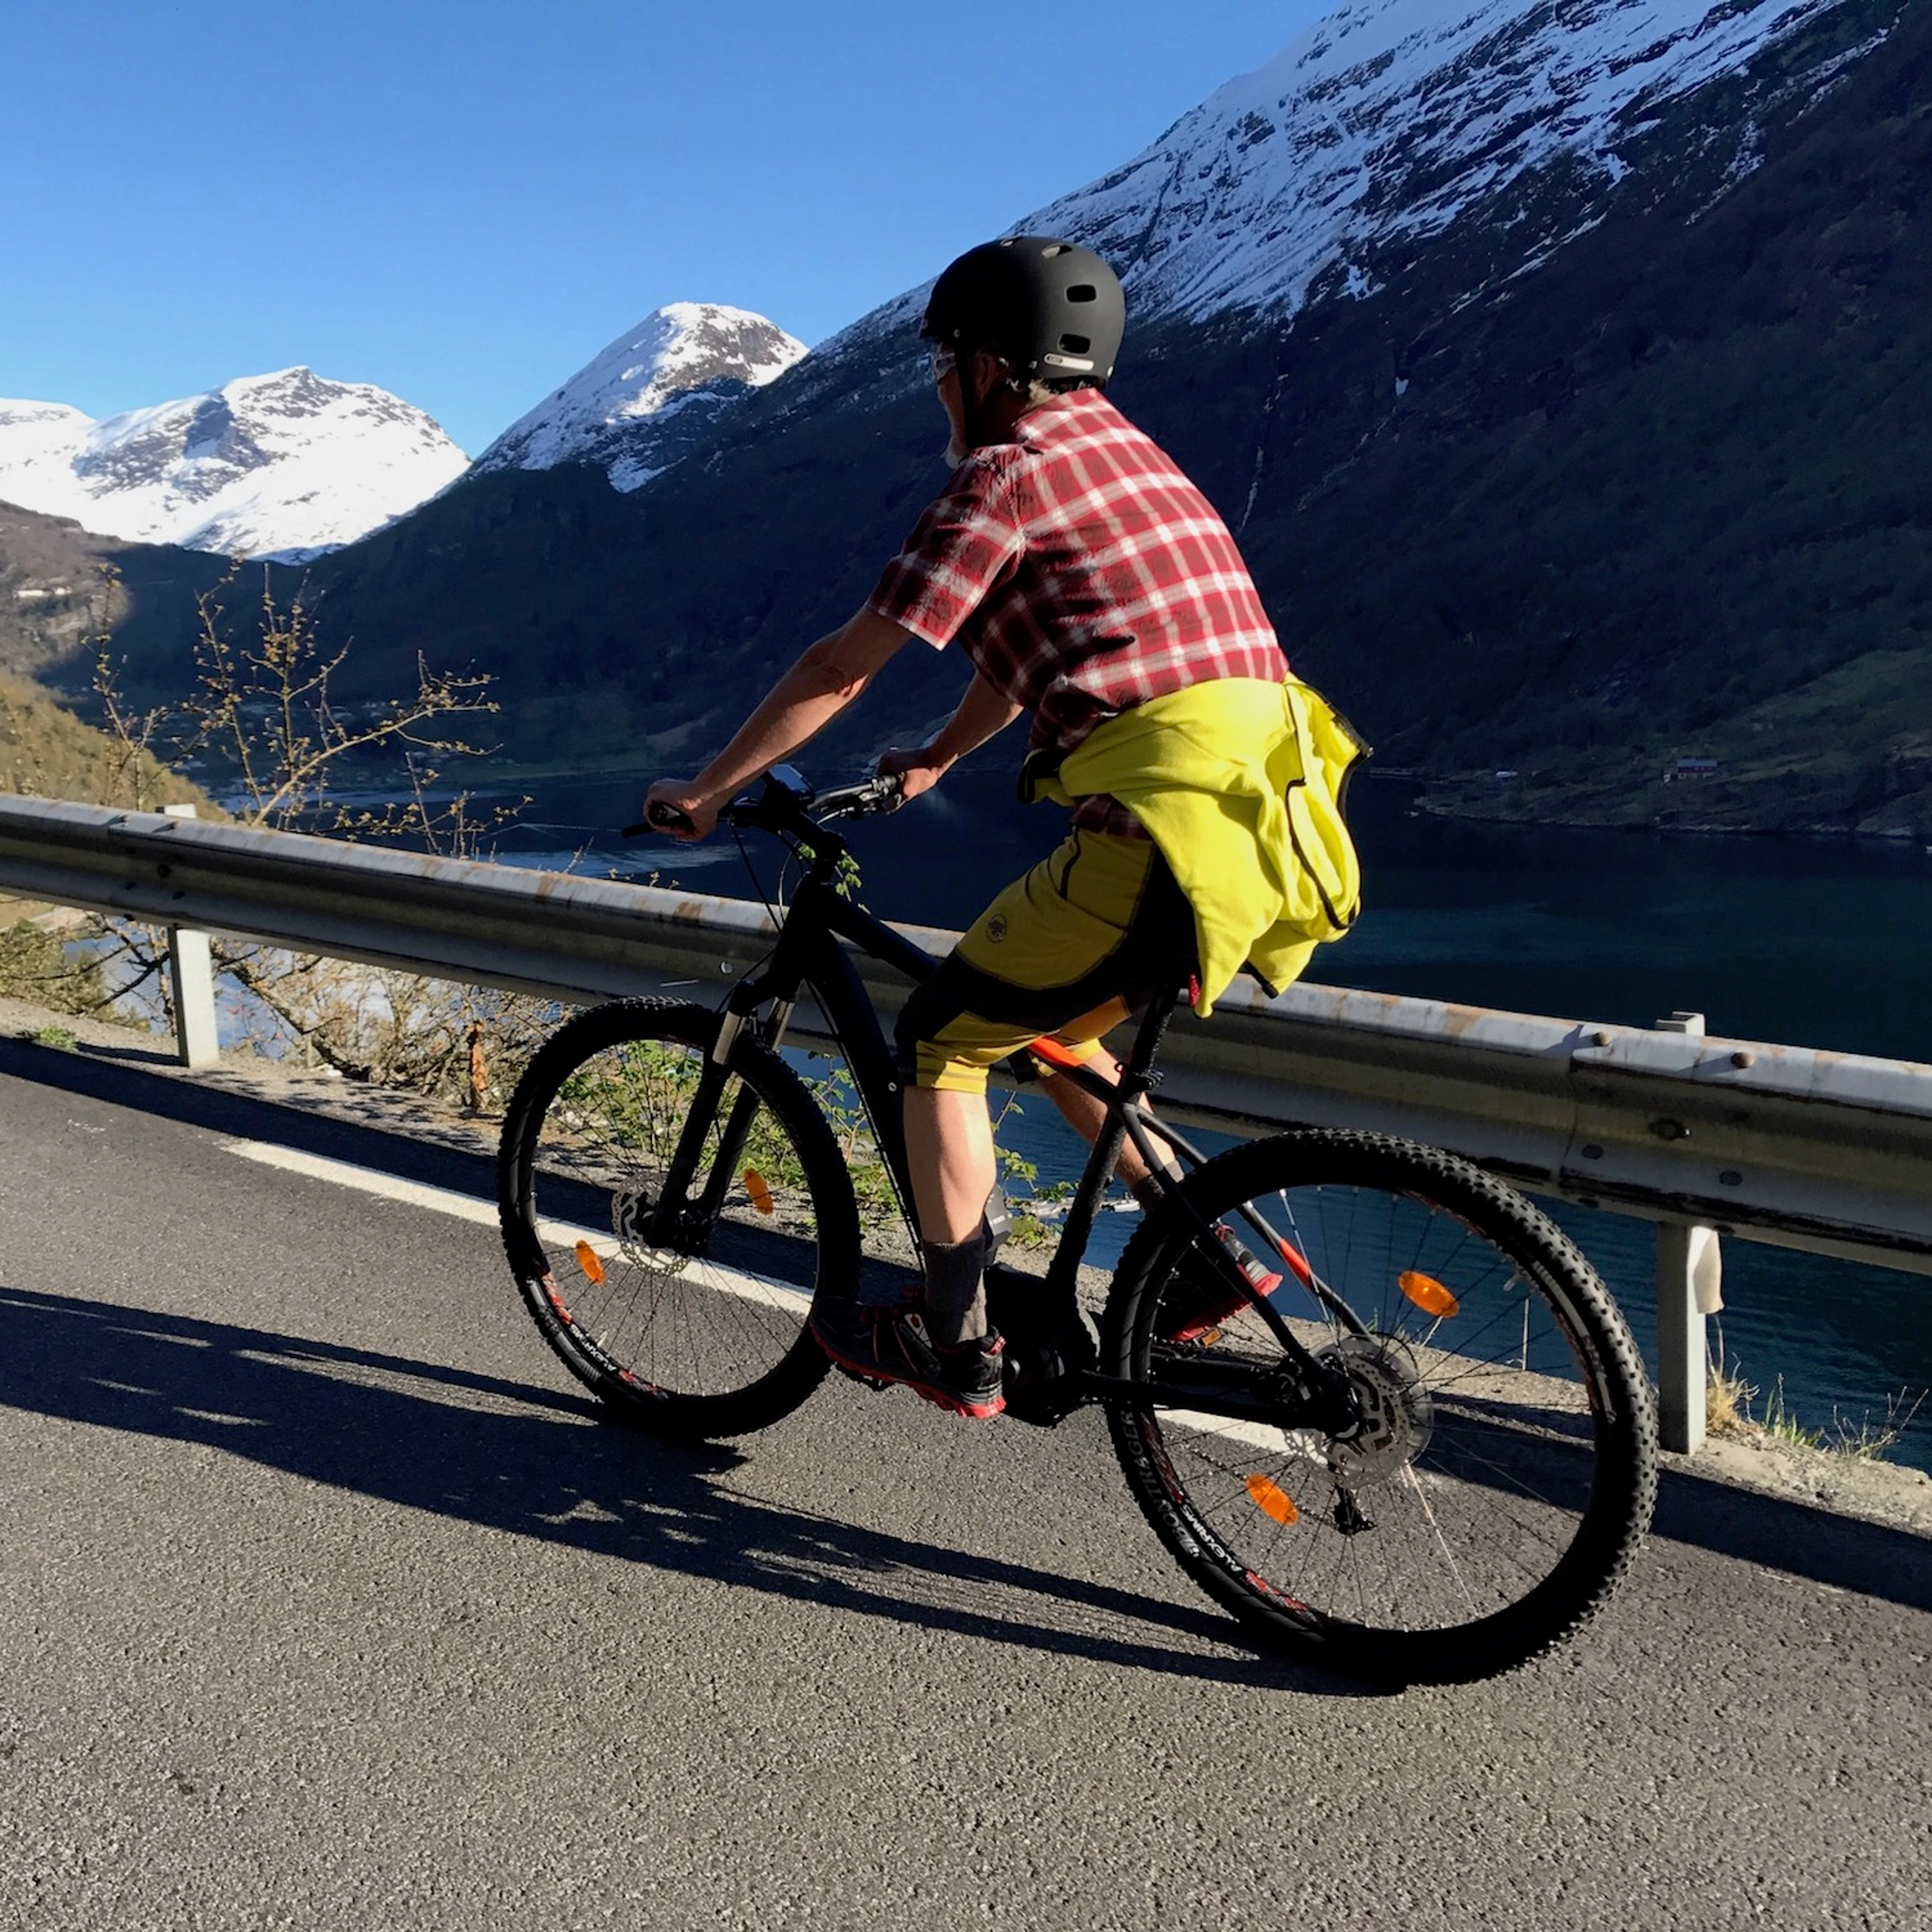 Things to do in Geiranger - E-bike hire in Geiranger, On the way up to the viewpoint over the Geirangerfjord, Norway